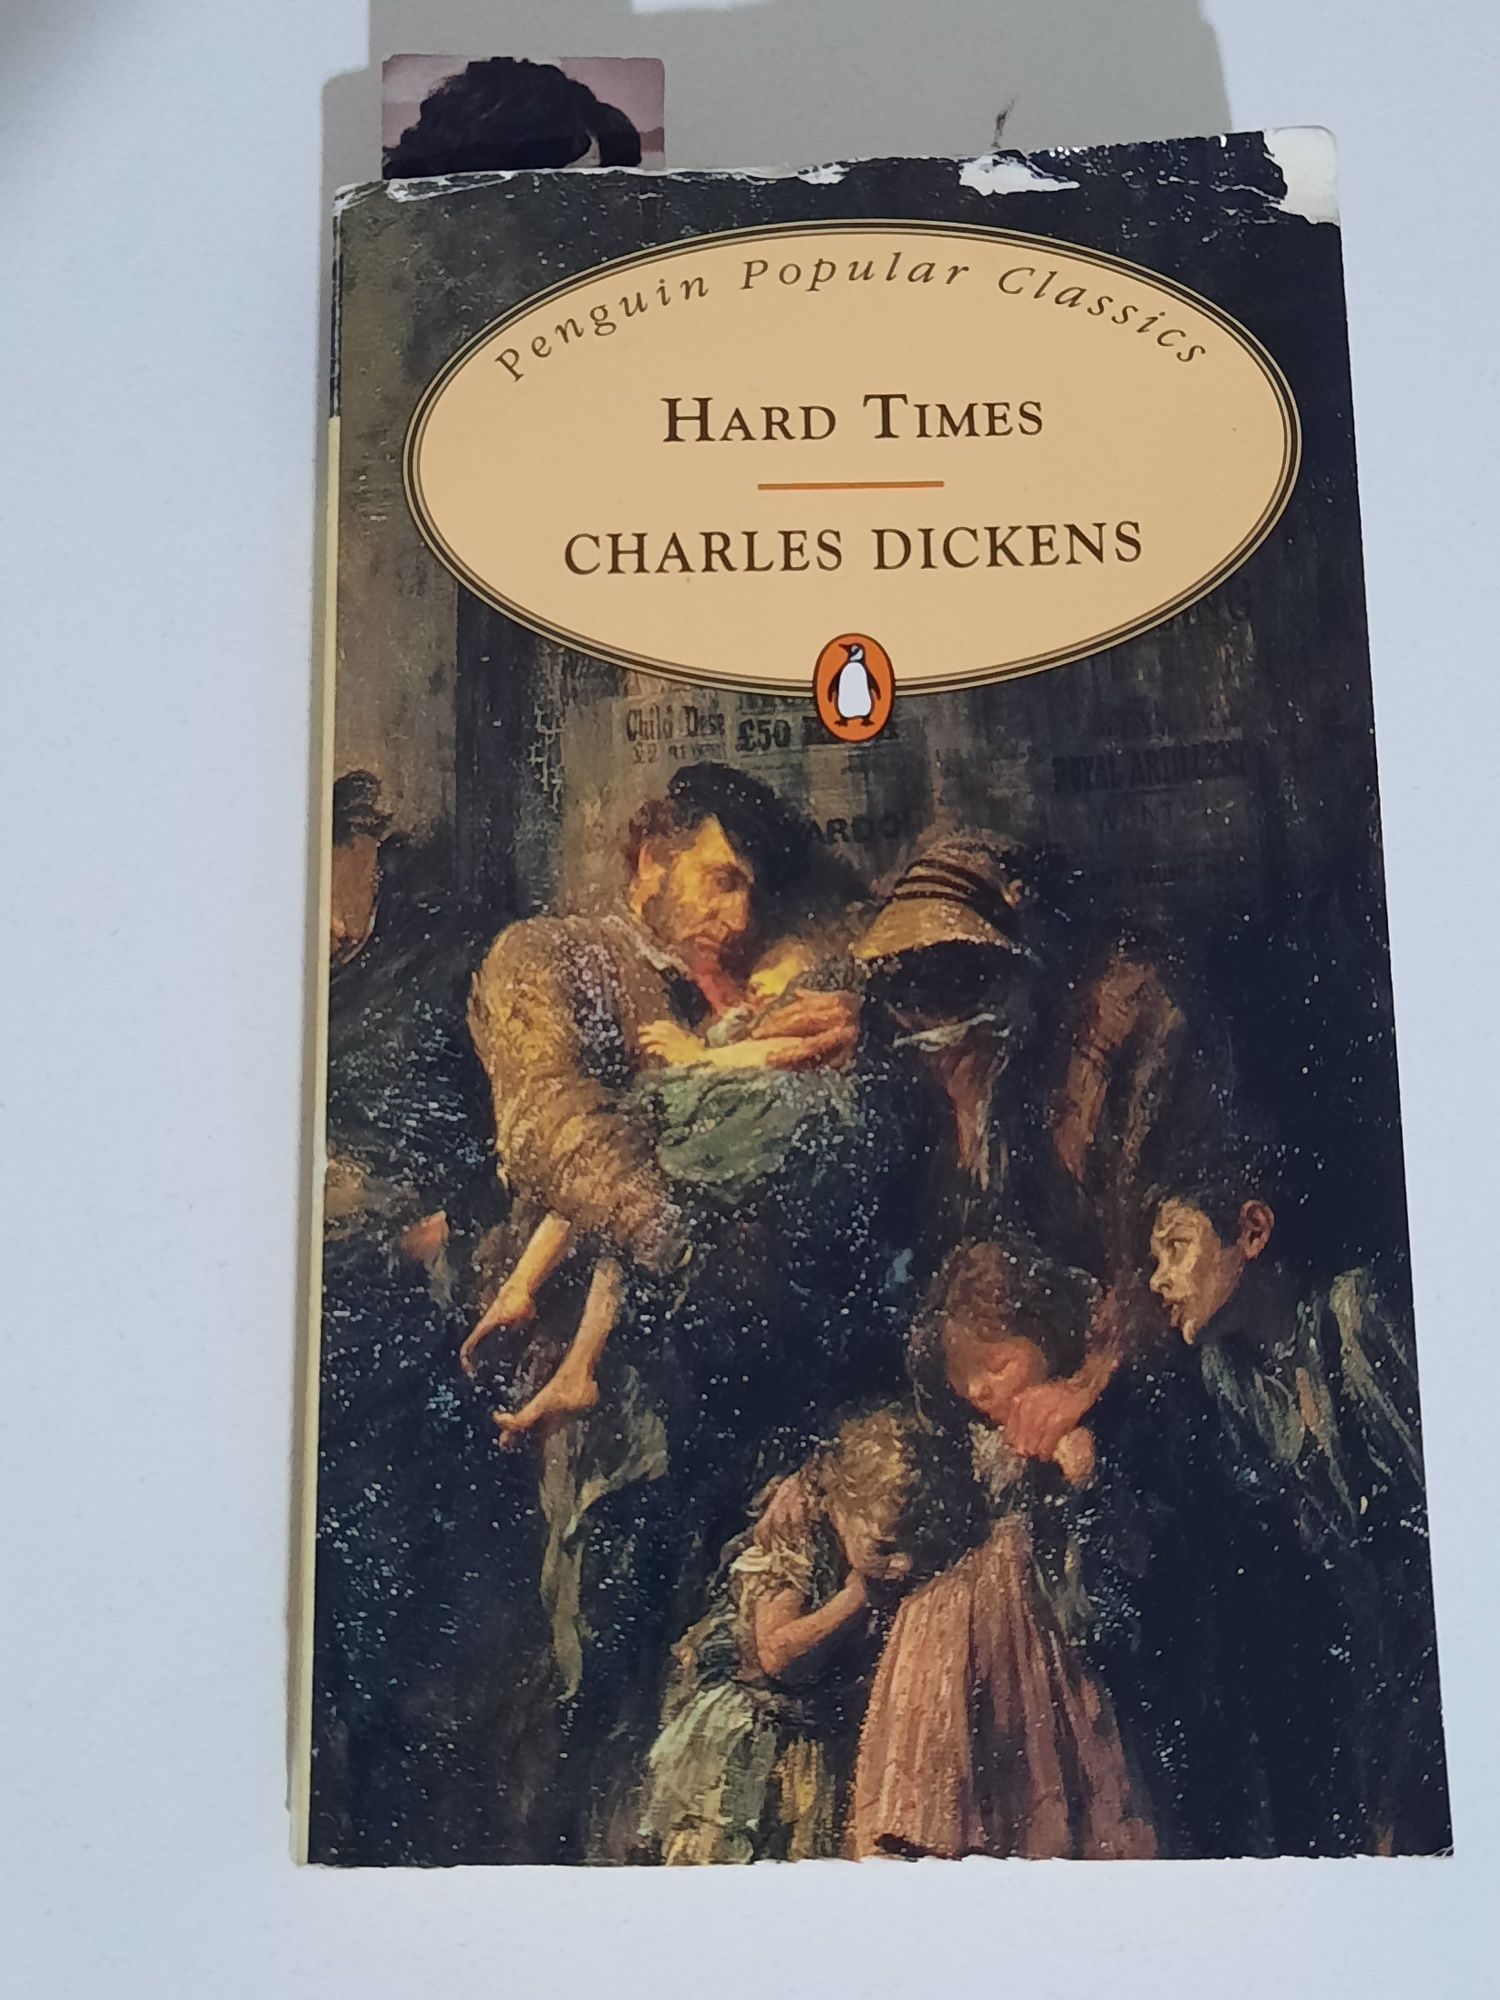 Charles Dickens "Hard times"